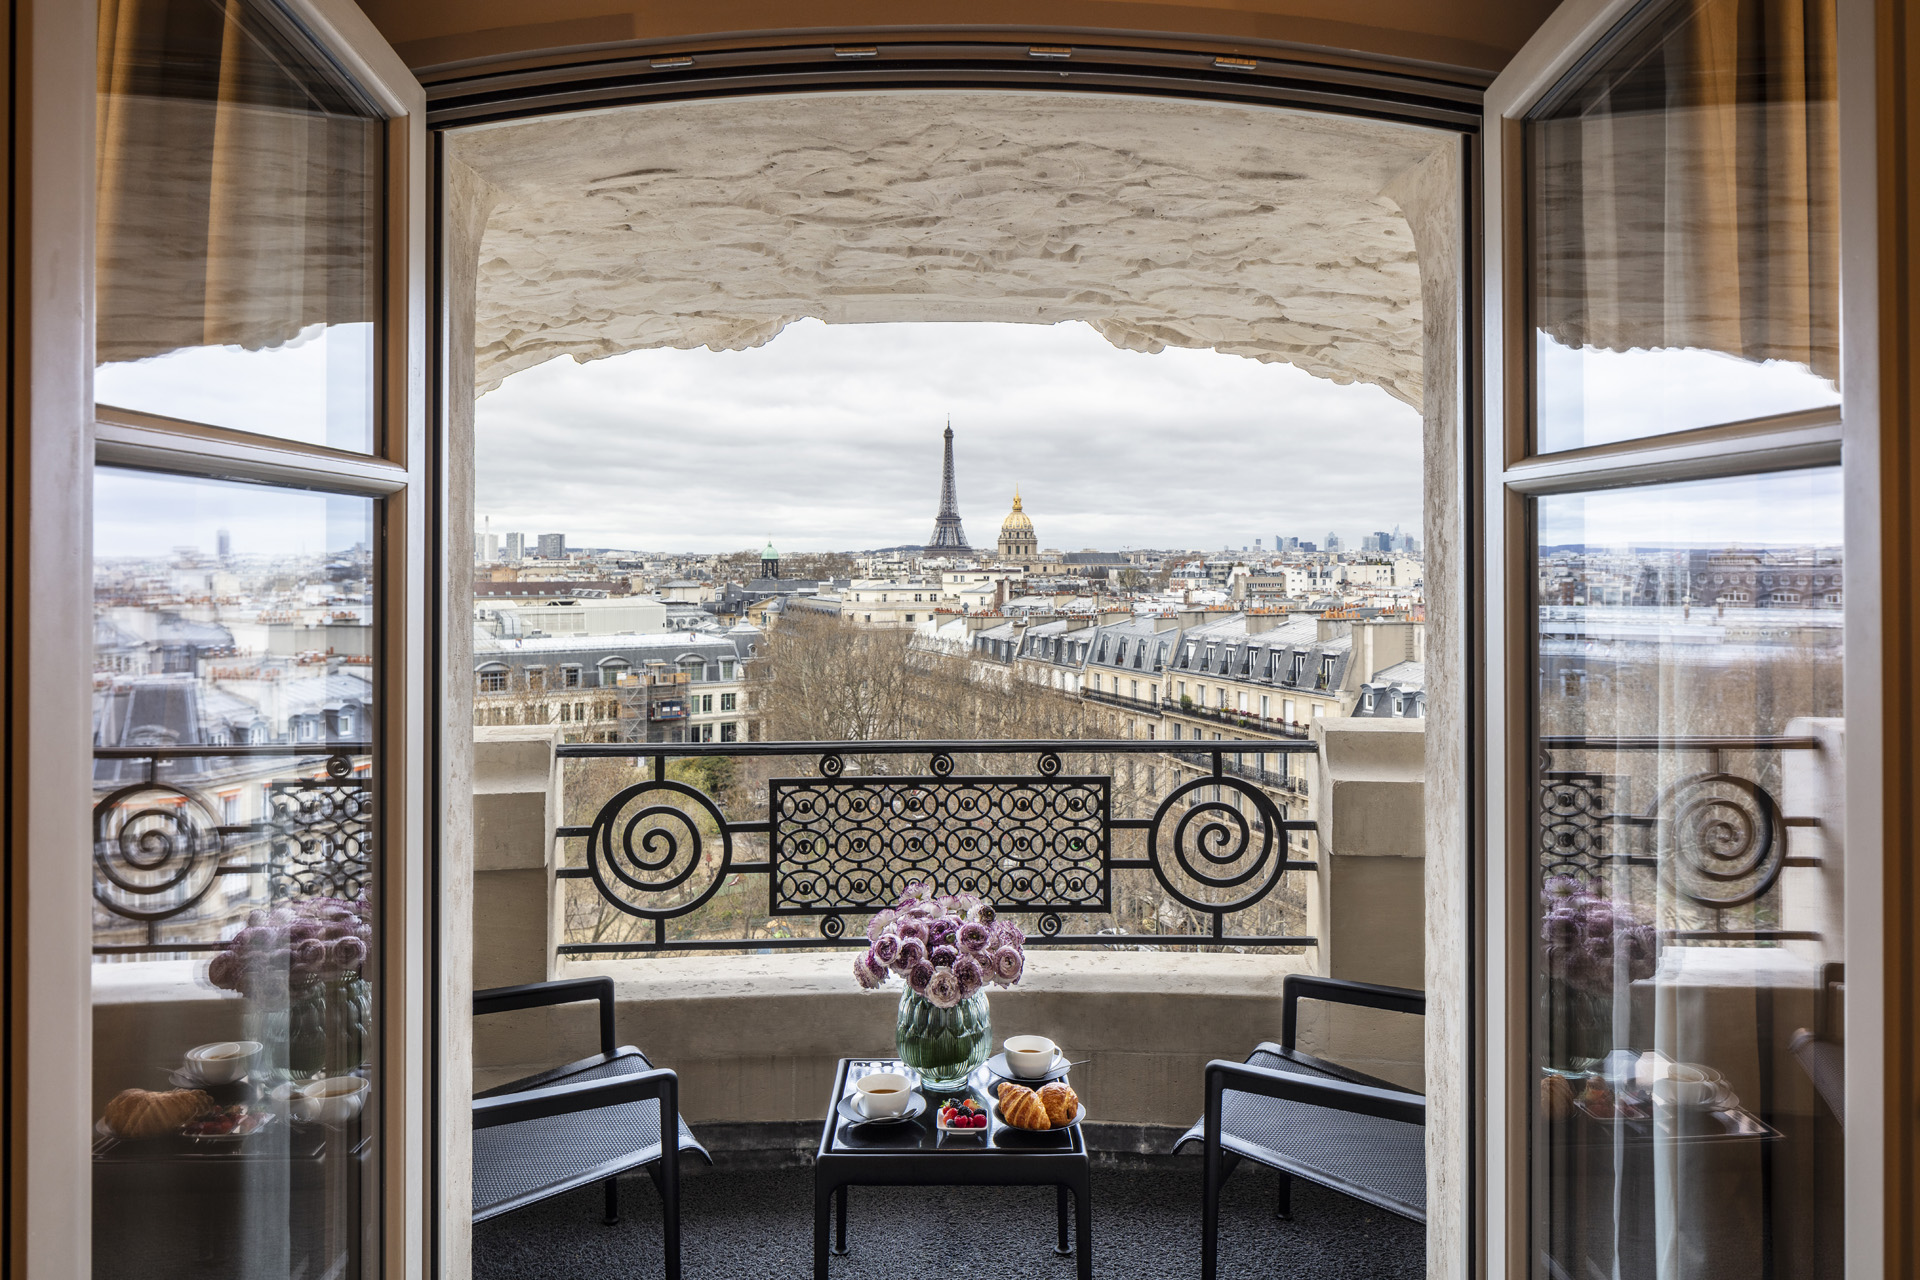 12 Of The World's Most Beautiful Hotel Rooms With A View